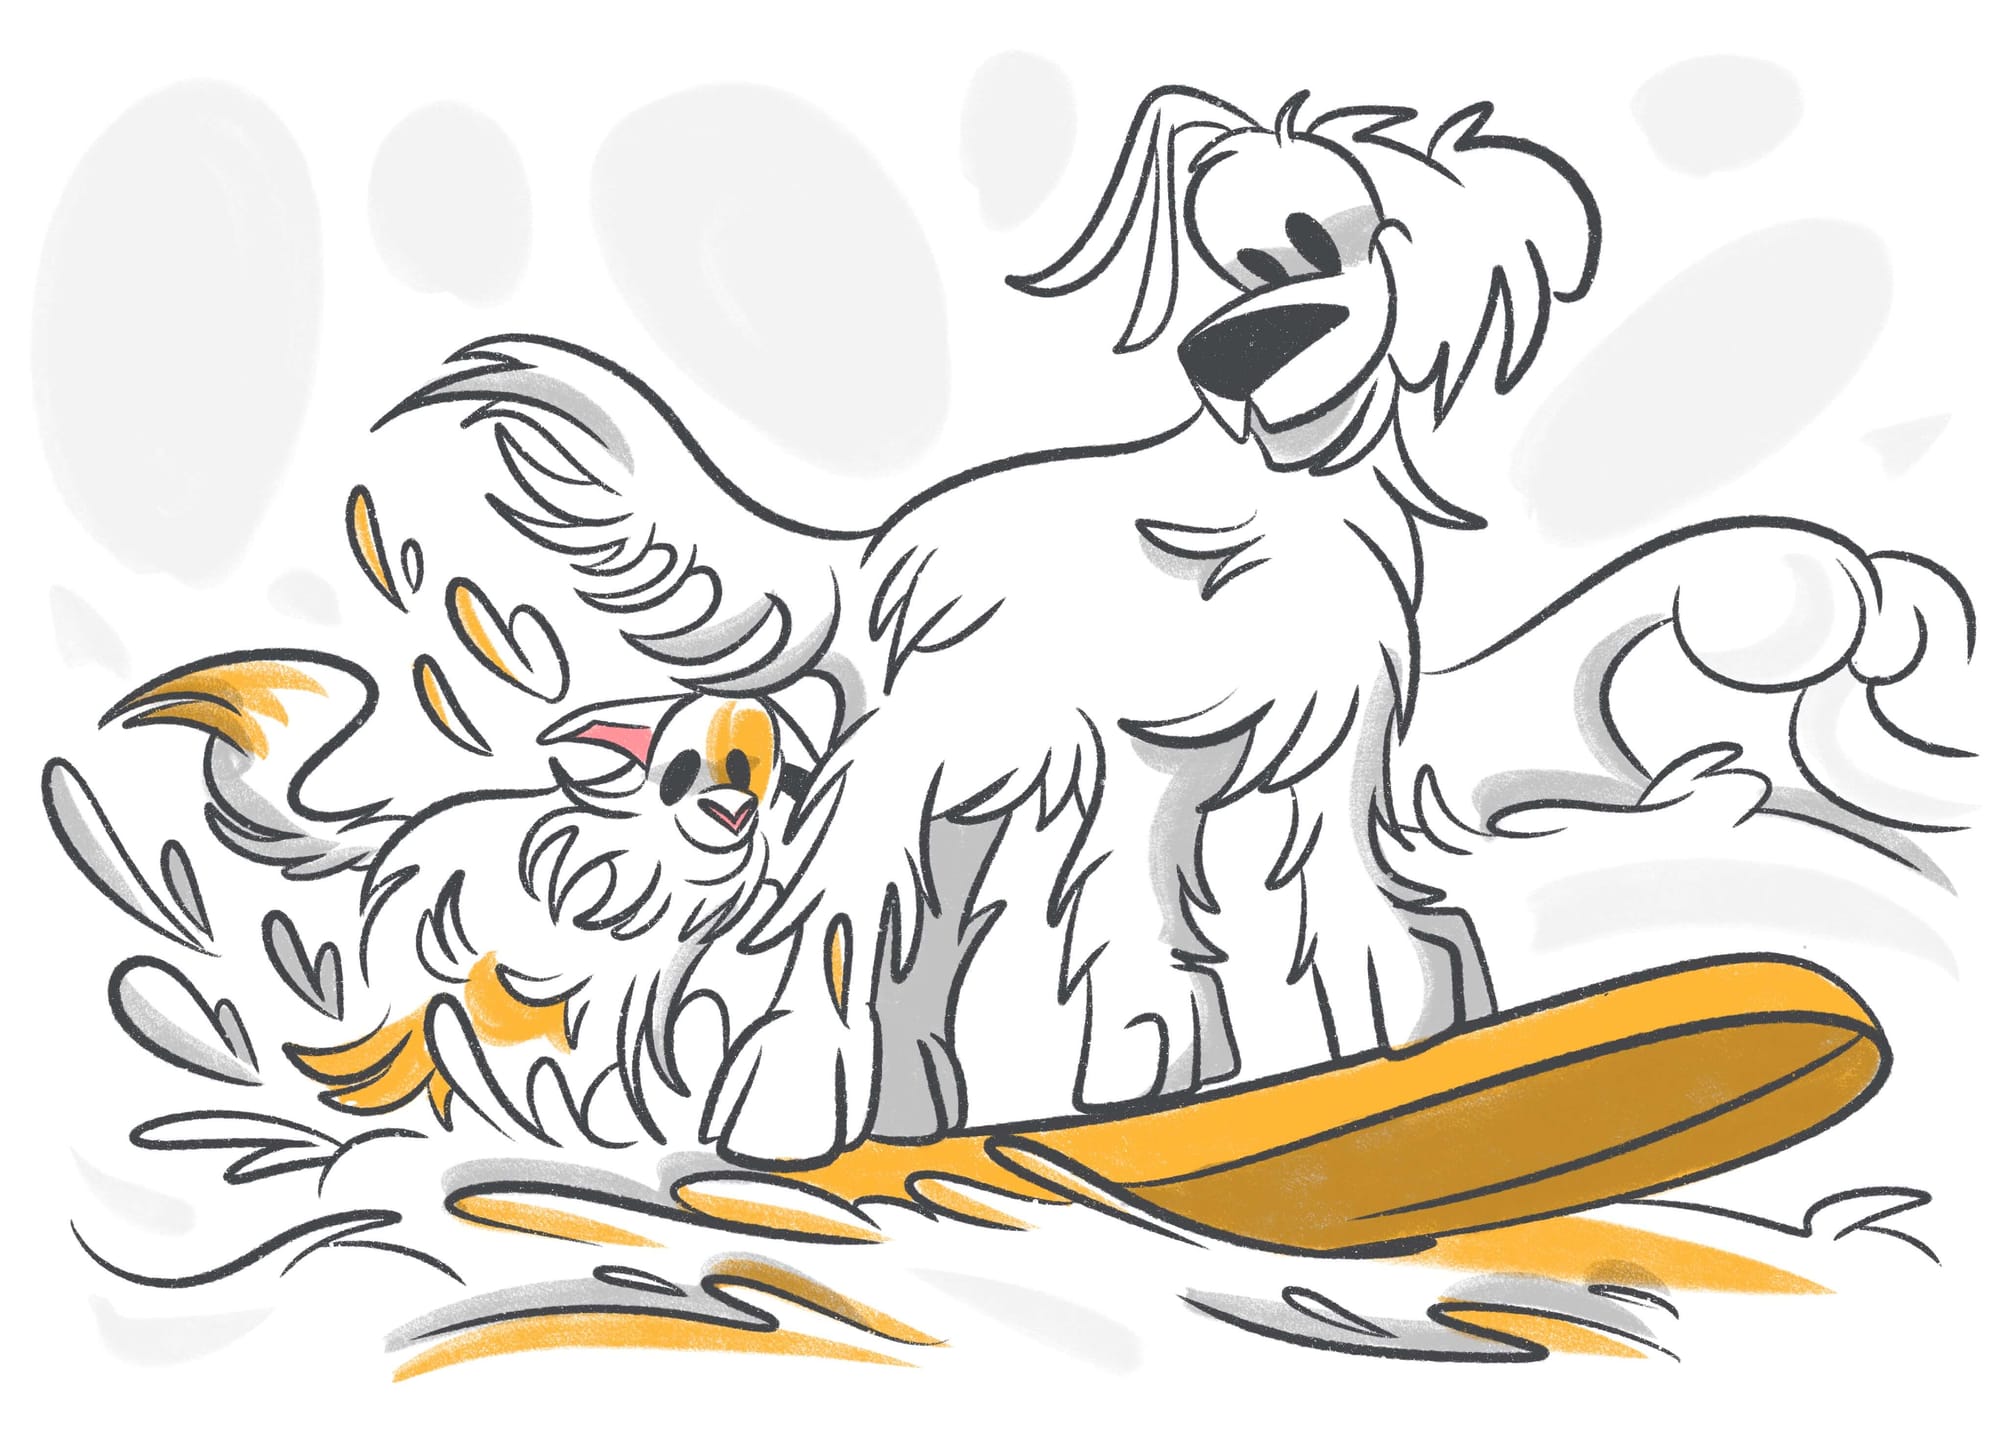 Safety Tips For Taking Your Dog To The Beach